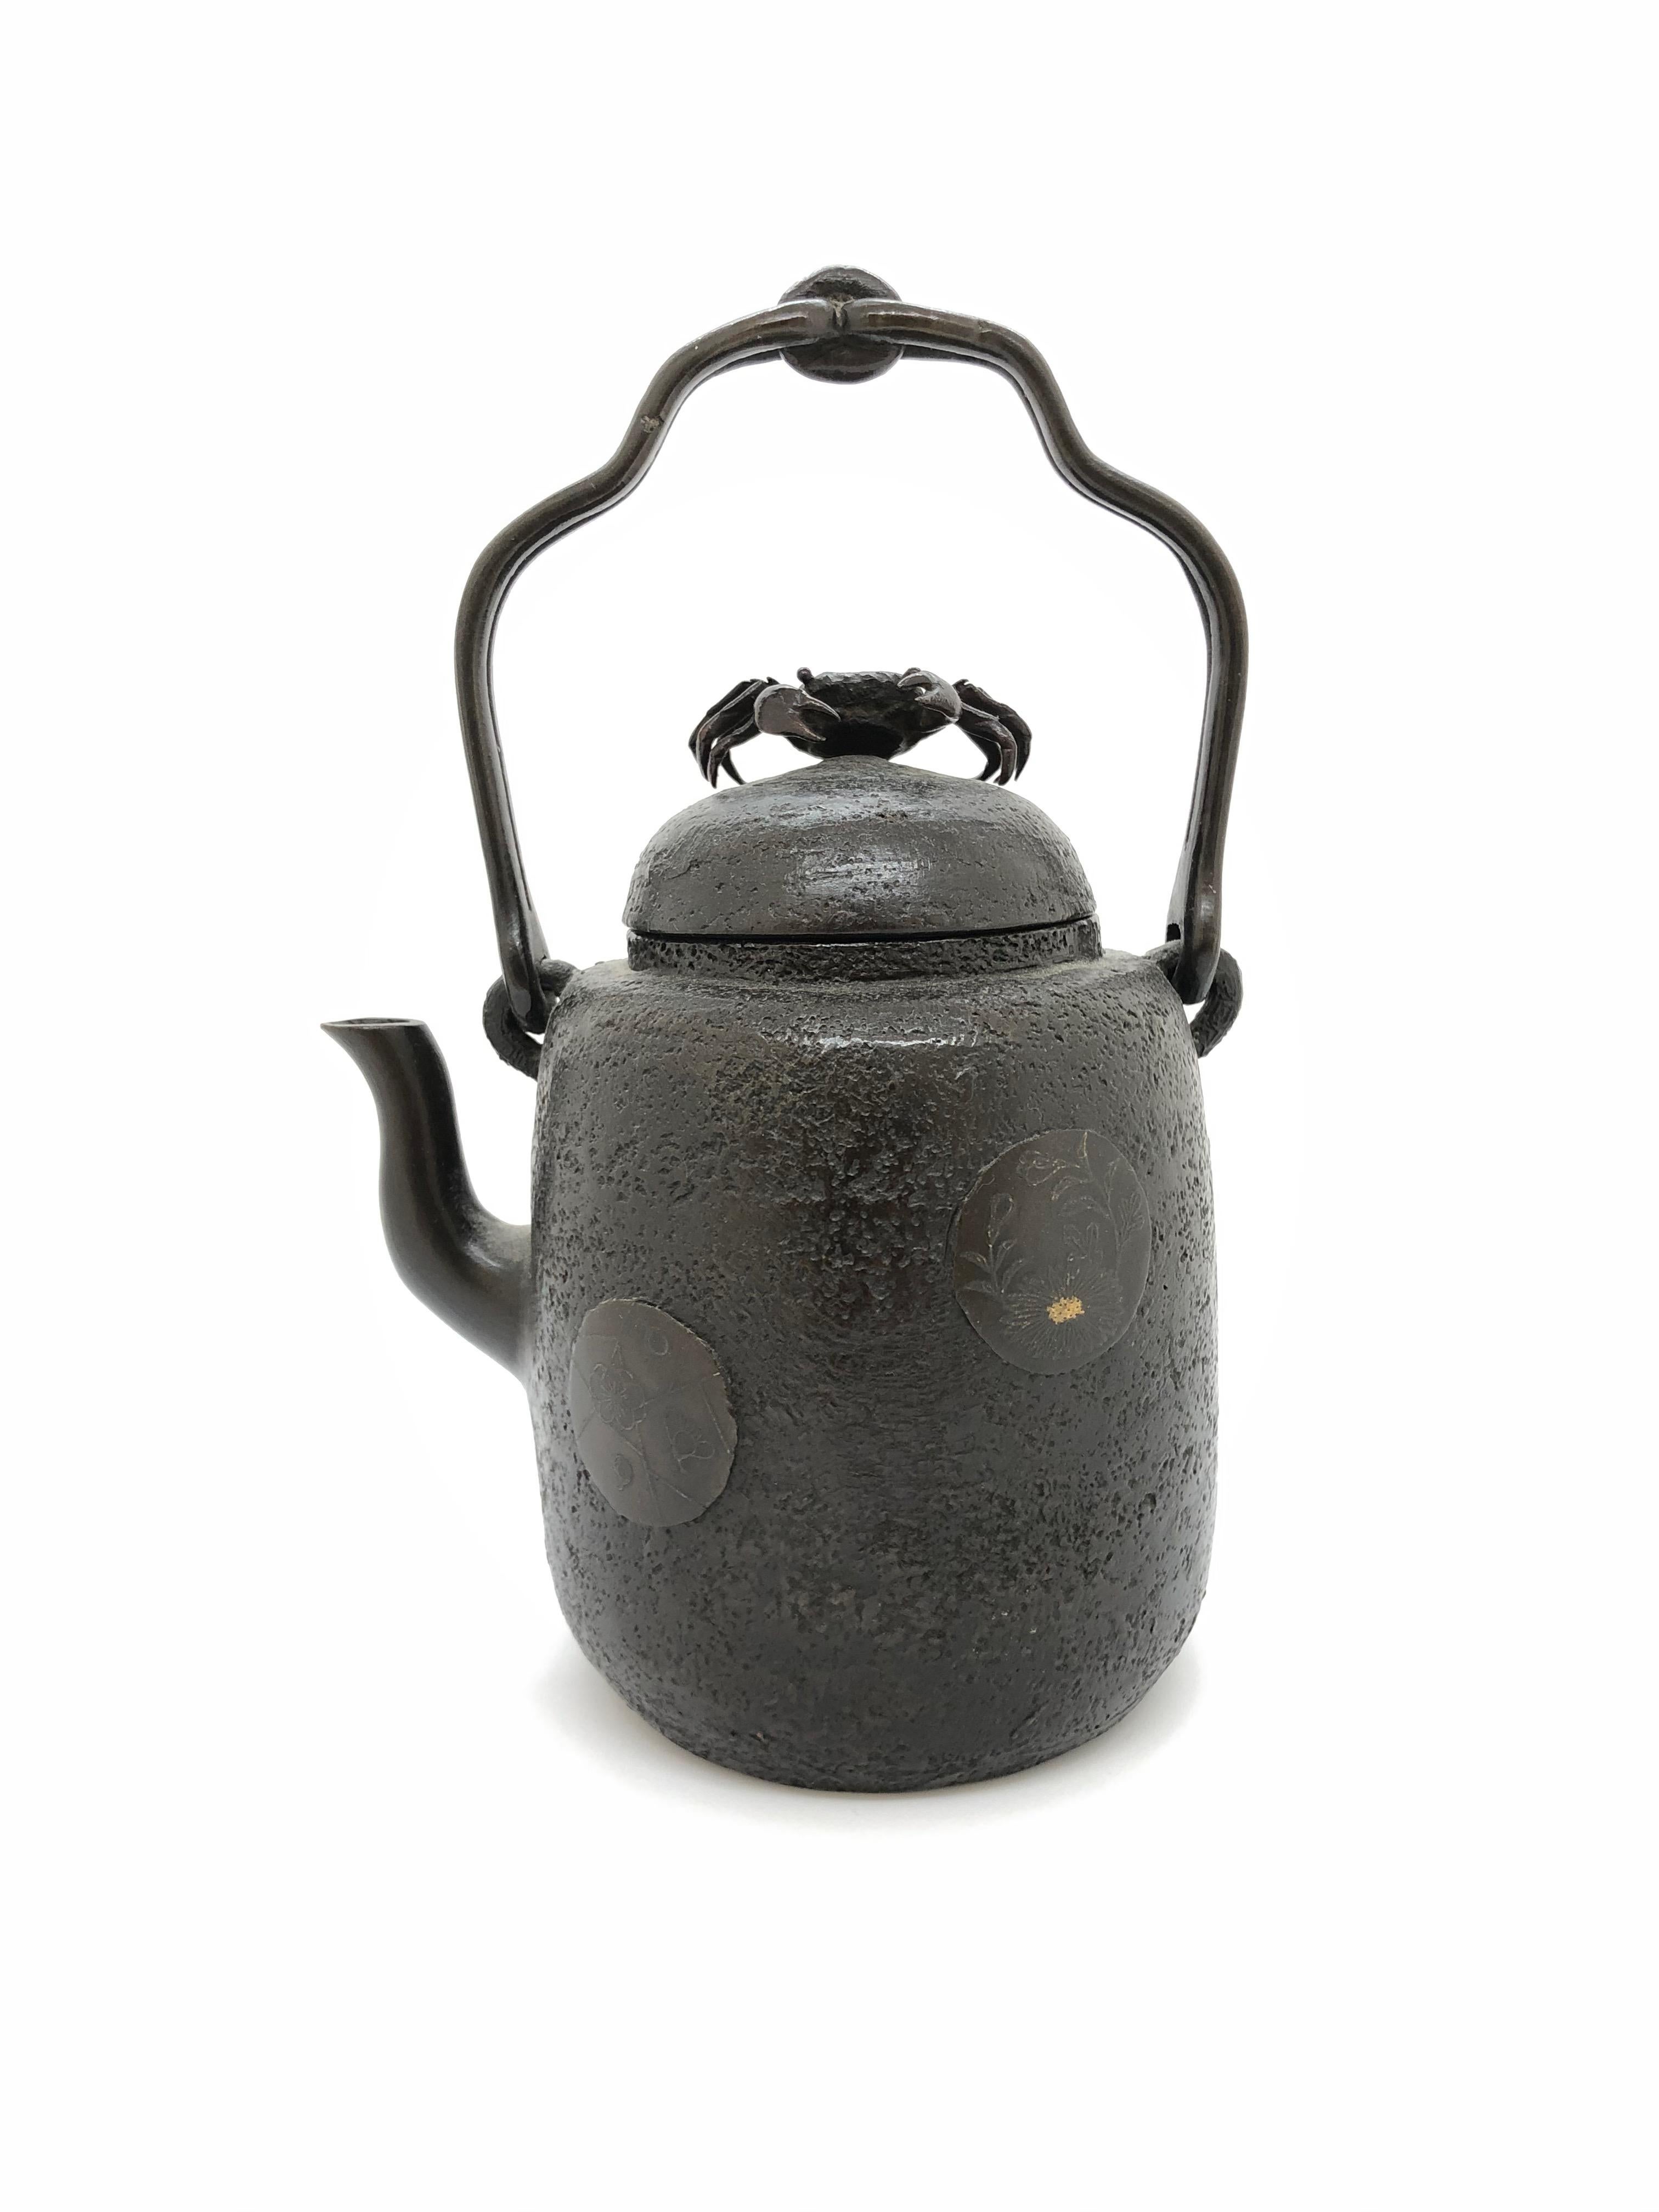 A Japanese teapot with a lid where a crab is seated, late 19th century.